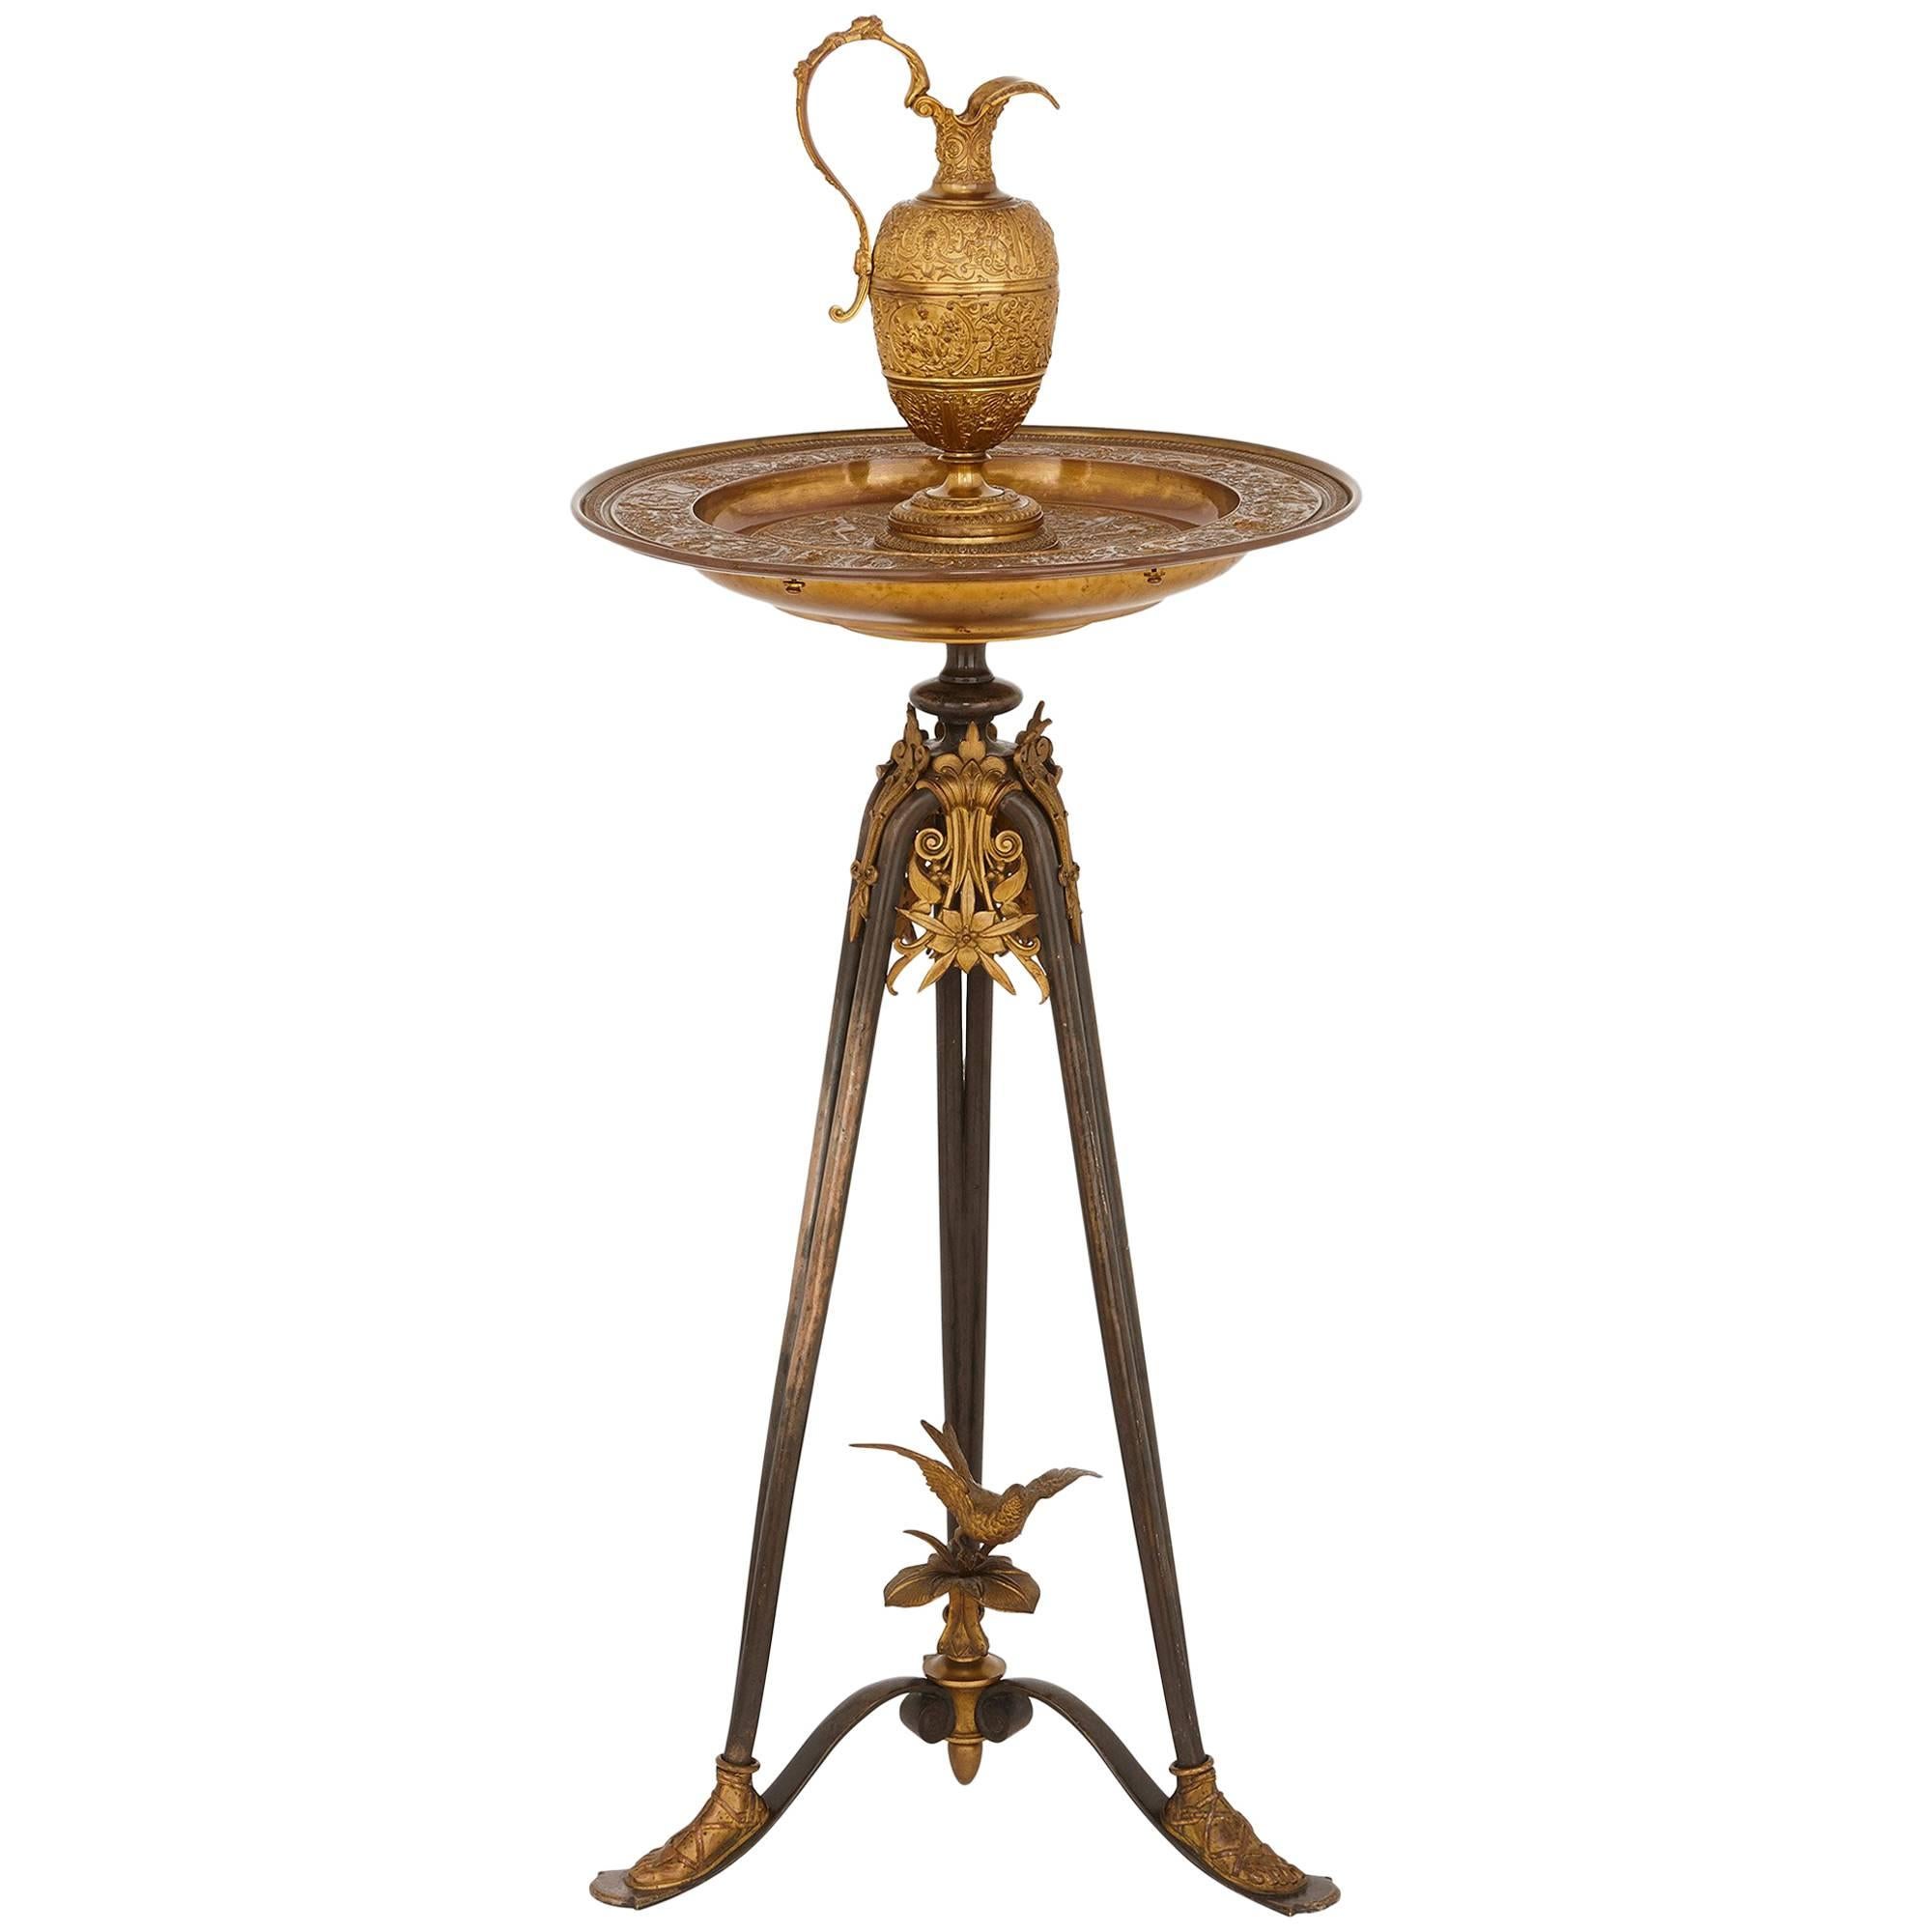 Gilt and Patinated Bronze Ewer on Stand, Attributed to Barbedienne